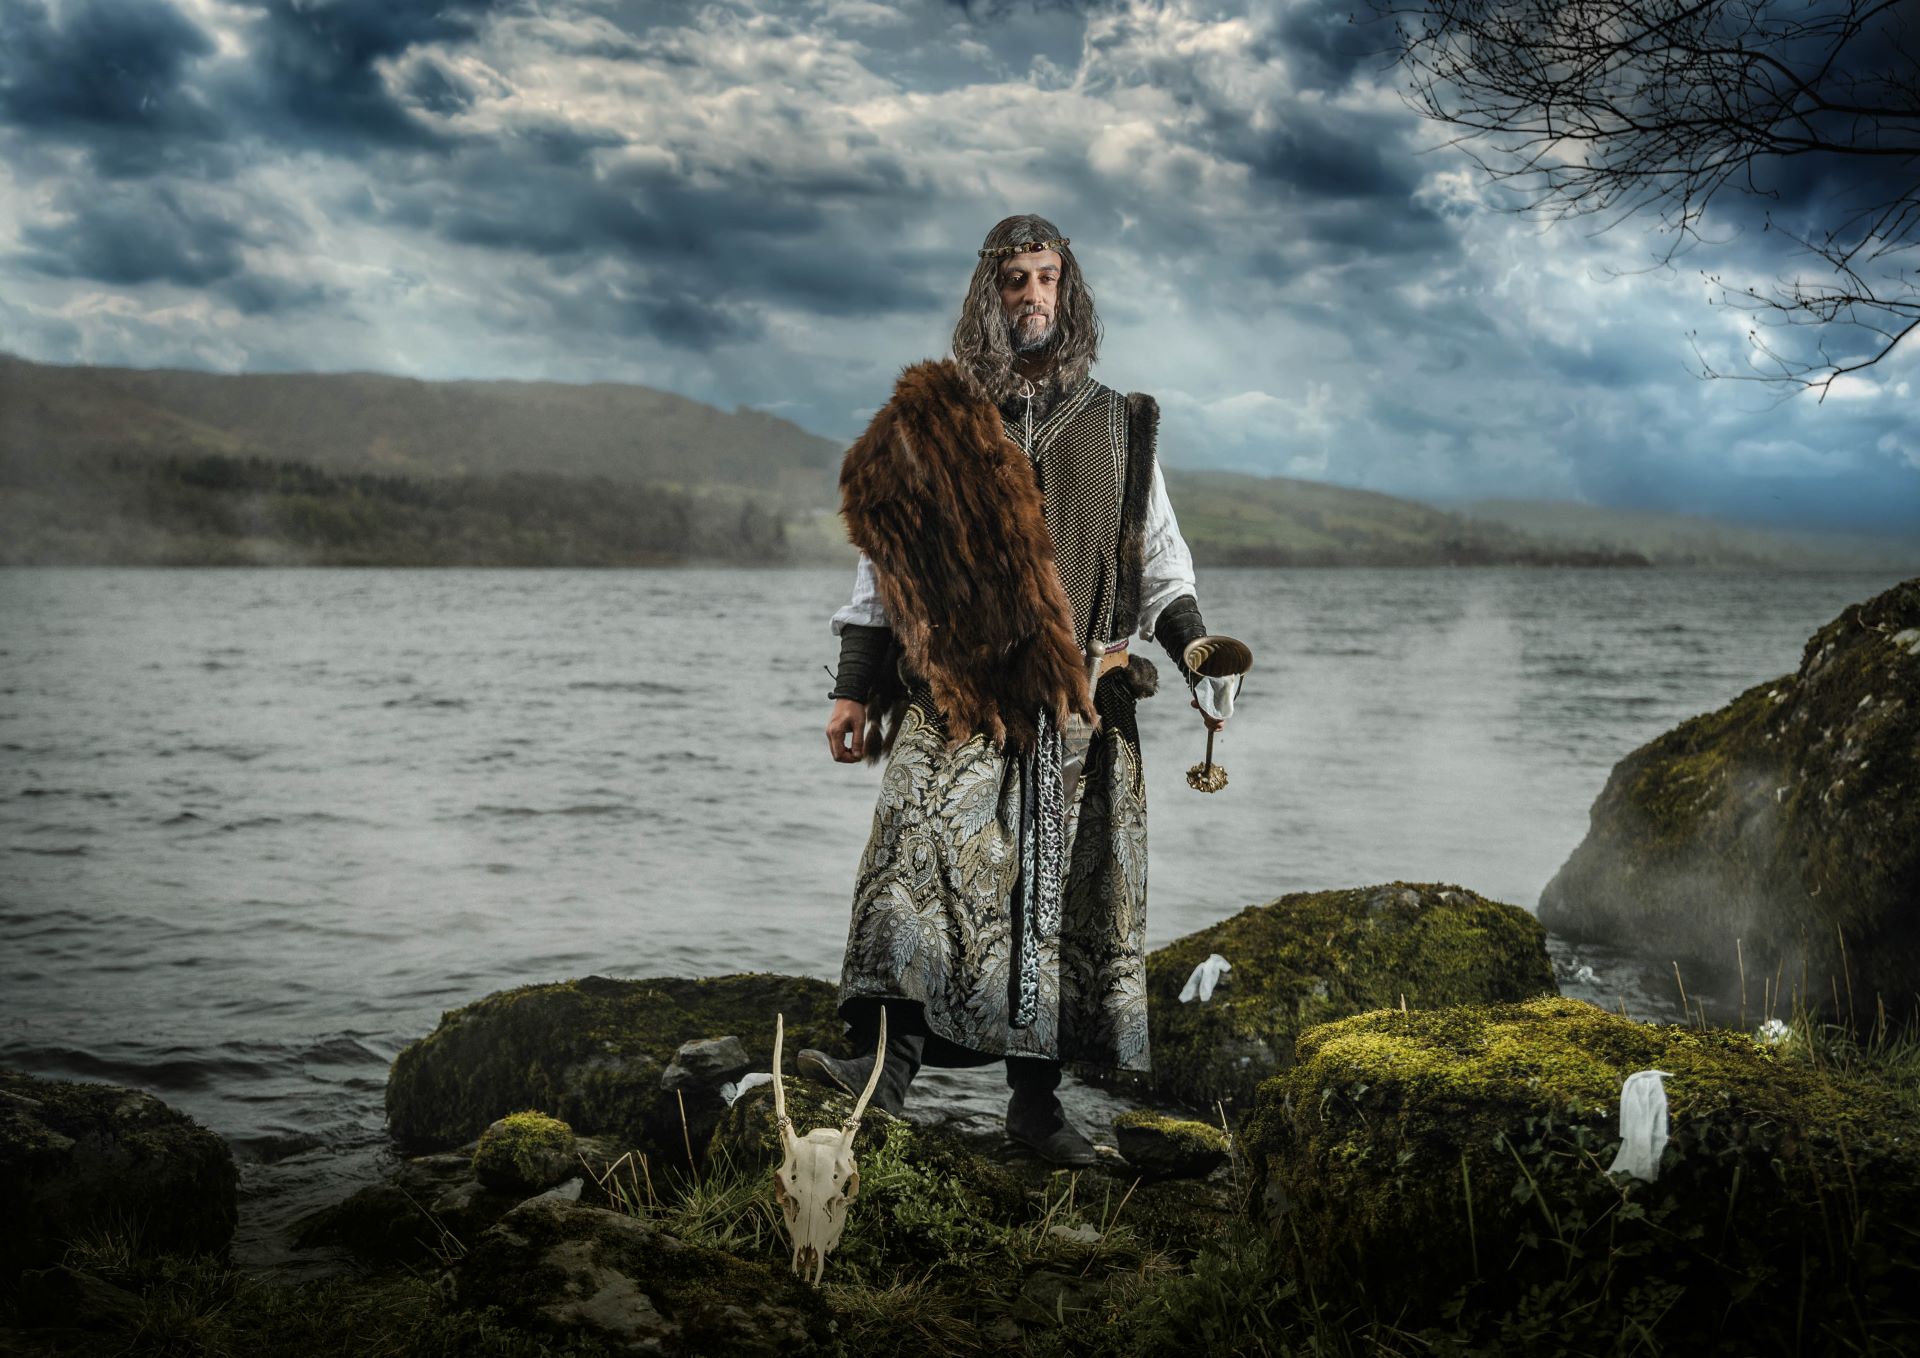 The mythical character, Pryderi, poses on the shores of Llyn Tegid.